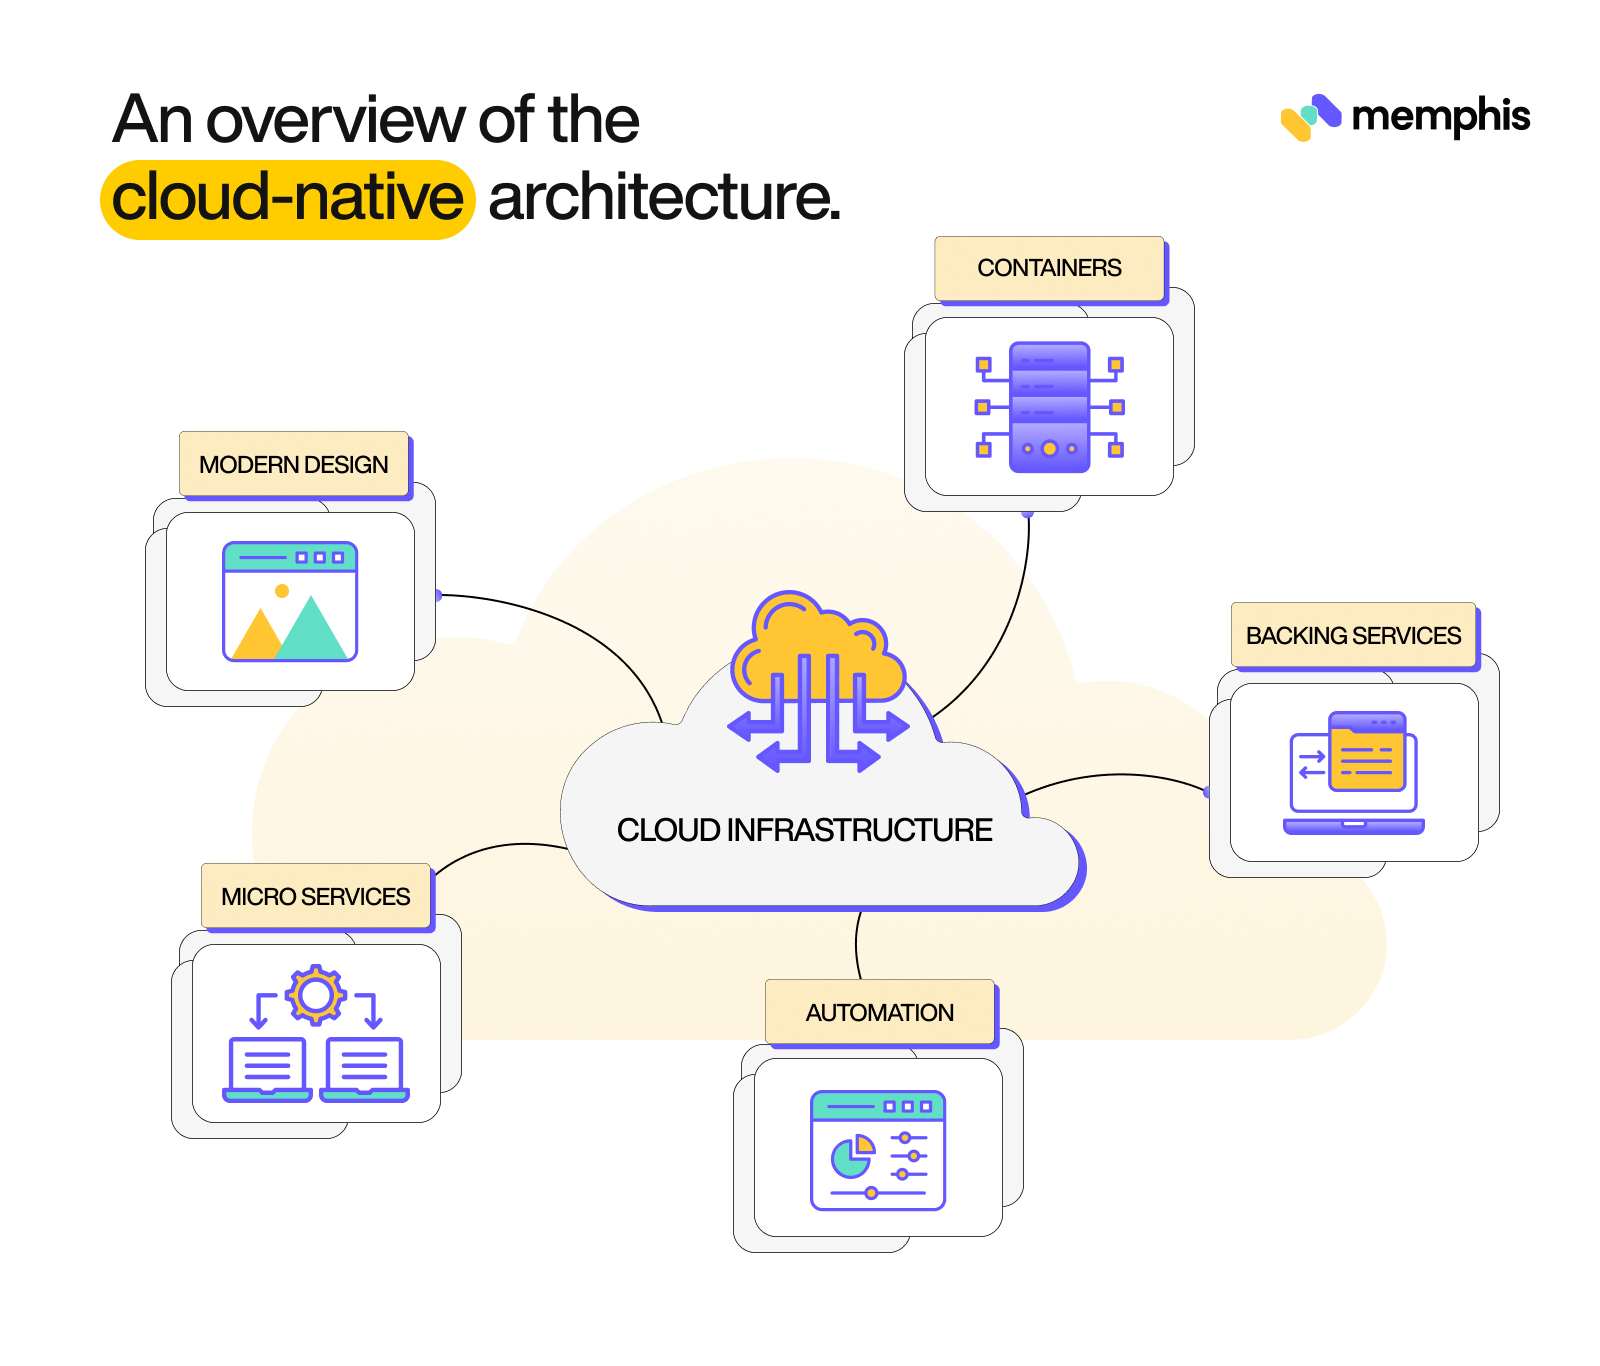 An overview of the cloud-native architecture